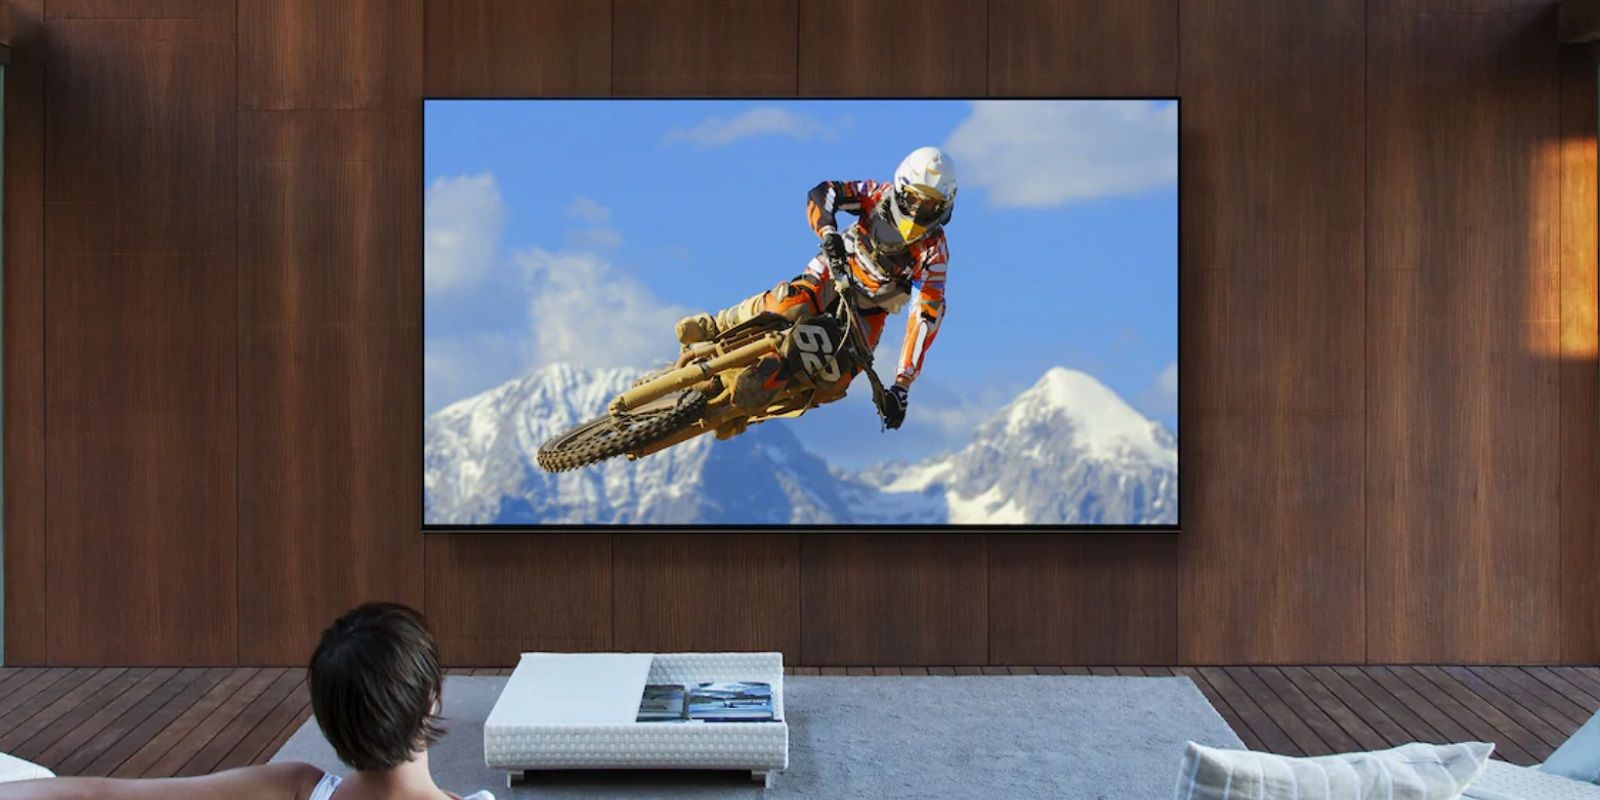 The Pros (& Cons) of a 4K Projector Vs 4K HD TV in Your Home Theater